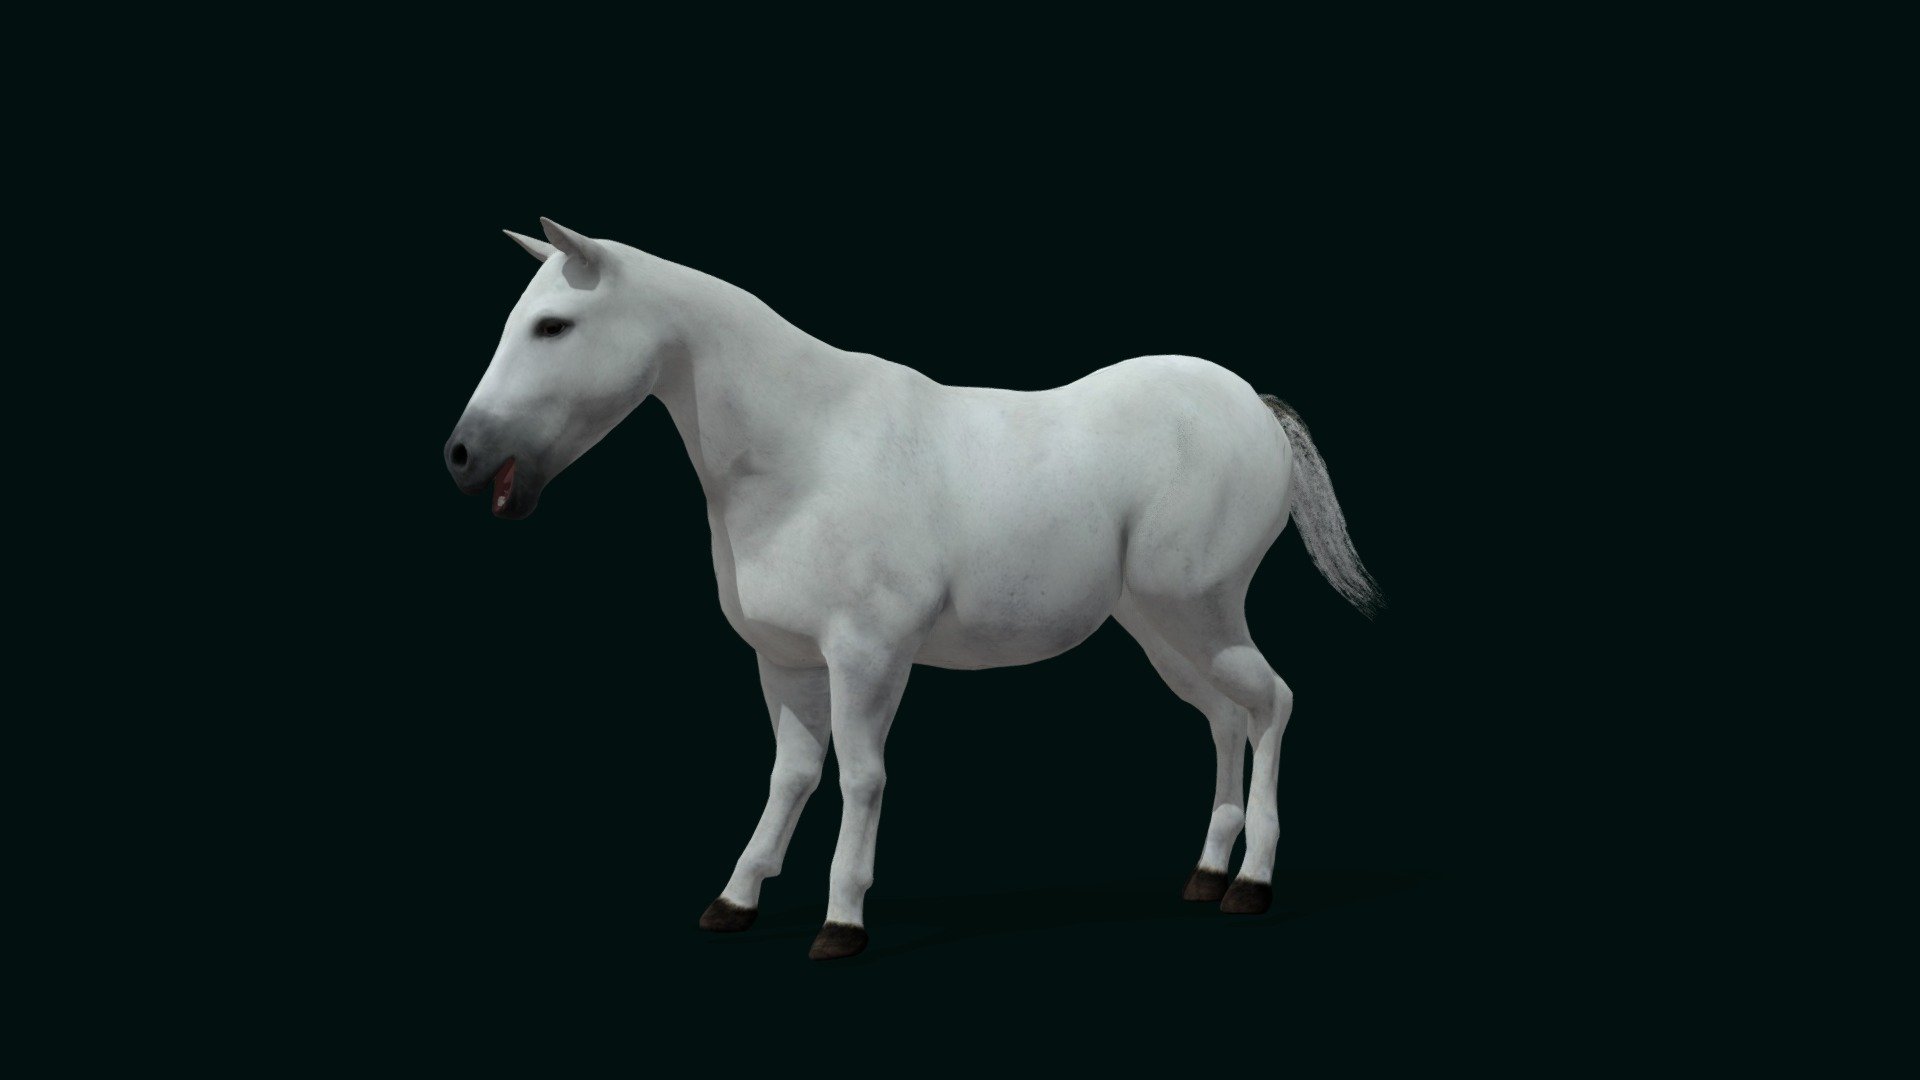 Mule(hybrid animal)domestic equine hybrid

Equus asinus × Equus caballus Animal Mammal(Equus mulus.)Pet,Cute,Domestic Animal

1 Draw Calls

MidPoly 

Game Ready (Asset)

Subdivision Surface Ready

6 - Animations

4K PBR Textures Material

Unreal FBX (Unreal 4,5 Plus)

Unity FBX

Blend File 3.6.5 LTS

USDZ File (AR Ready). Real Scale Dimension (Xcode ,Reality Composer, Keynote Ready)

Textures Files

GLB File (Unreal 5.1 Plus Native Support)

Gltf File ( Spark AR, Lens Studio(SnapChat) , Effector(Tiktok) , Spline, Play Canvas,Omiverse ) Compatible

Triangles -37561

Faces -25331

Edges -45478

Vertices -20262

** Diffuse, Metallic, Roughness , Normal Map ,Specular Map,AO**
A mule is a hybrid animal that is the offspring of a male donkey and a female horse.Mules are generally larger than a donkey ,smaller than a horse, with a head similar to a donkey and the extremities of a horse. a domestic equine hybrid between a donkey and a horse. It is the offspring of  male donkey and a female horse - Mule (Domestic Equine) - Buy Royalty Free 3D model by Nyilonelycompany 3d model